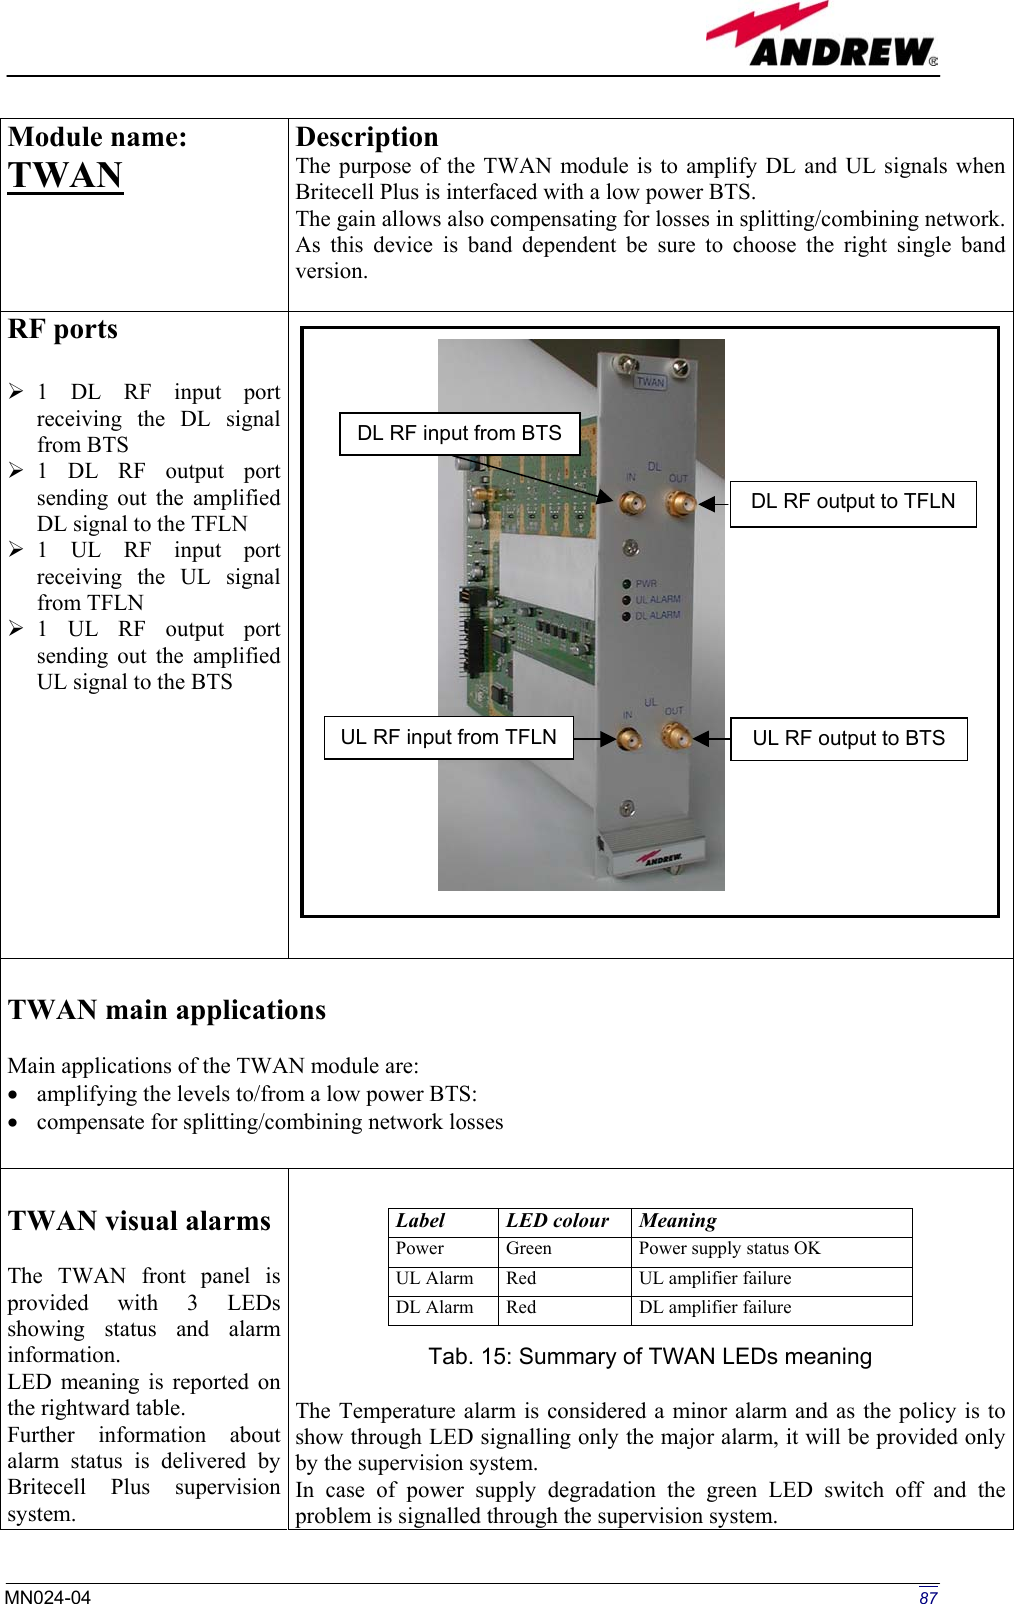  Module name:  TWAN  Description The purpose of the TWAN module is to amplify DL and UL signals when Britecell Plus is interfaced with a low power BTS. The gain allows also compensating for losses in splitting/combining network.As this device is band dependent be sure to choose the right single band version.   RF ports   1 DL RF input port receiving the DL signal from BTS  1 DL RF output port sending out the amplified DL signal to the TFLN   1 UL RF input port receiving the UL signal from TFLN  1 UL RF output port sending out the amplified UL signal to the BTS           TWAN main applications  Main applications of the TWAN module are: •  amplifying the levels to/from a low power BTS: •  compensate for splitting/combining network losses   TWAN visual alarms  The TWAN front panel is provided with 3 LEDs showing status and alarm information. LED meaning is reported on the rightward table. Further information about alarm status is delivered by Britecell Plus supervision system.        The Temperature alarm is considered a minor alarm and as the policy is to show through LED signalling only the major alarm, it will be provided only by the supervision system. In case of power supply degradation the green LED switch off and the problem is signalled through the supervision system. Label LED colour Meaning Power  Green  Power supply status OK UL Alarm  Red  UL amplifier failure DL Alarm  Red  DL amplifier failure Tab. 15: Summary of TWAN LEDs meaningUL RF output to BTSUL RF input from TFLNDL RF input from BTSDL RF output to TFLN 87MN024-04  